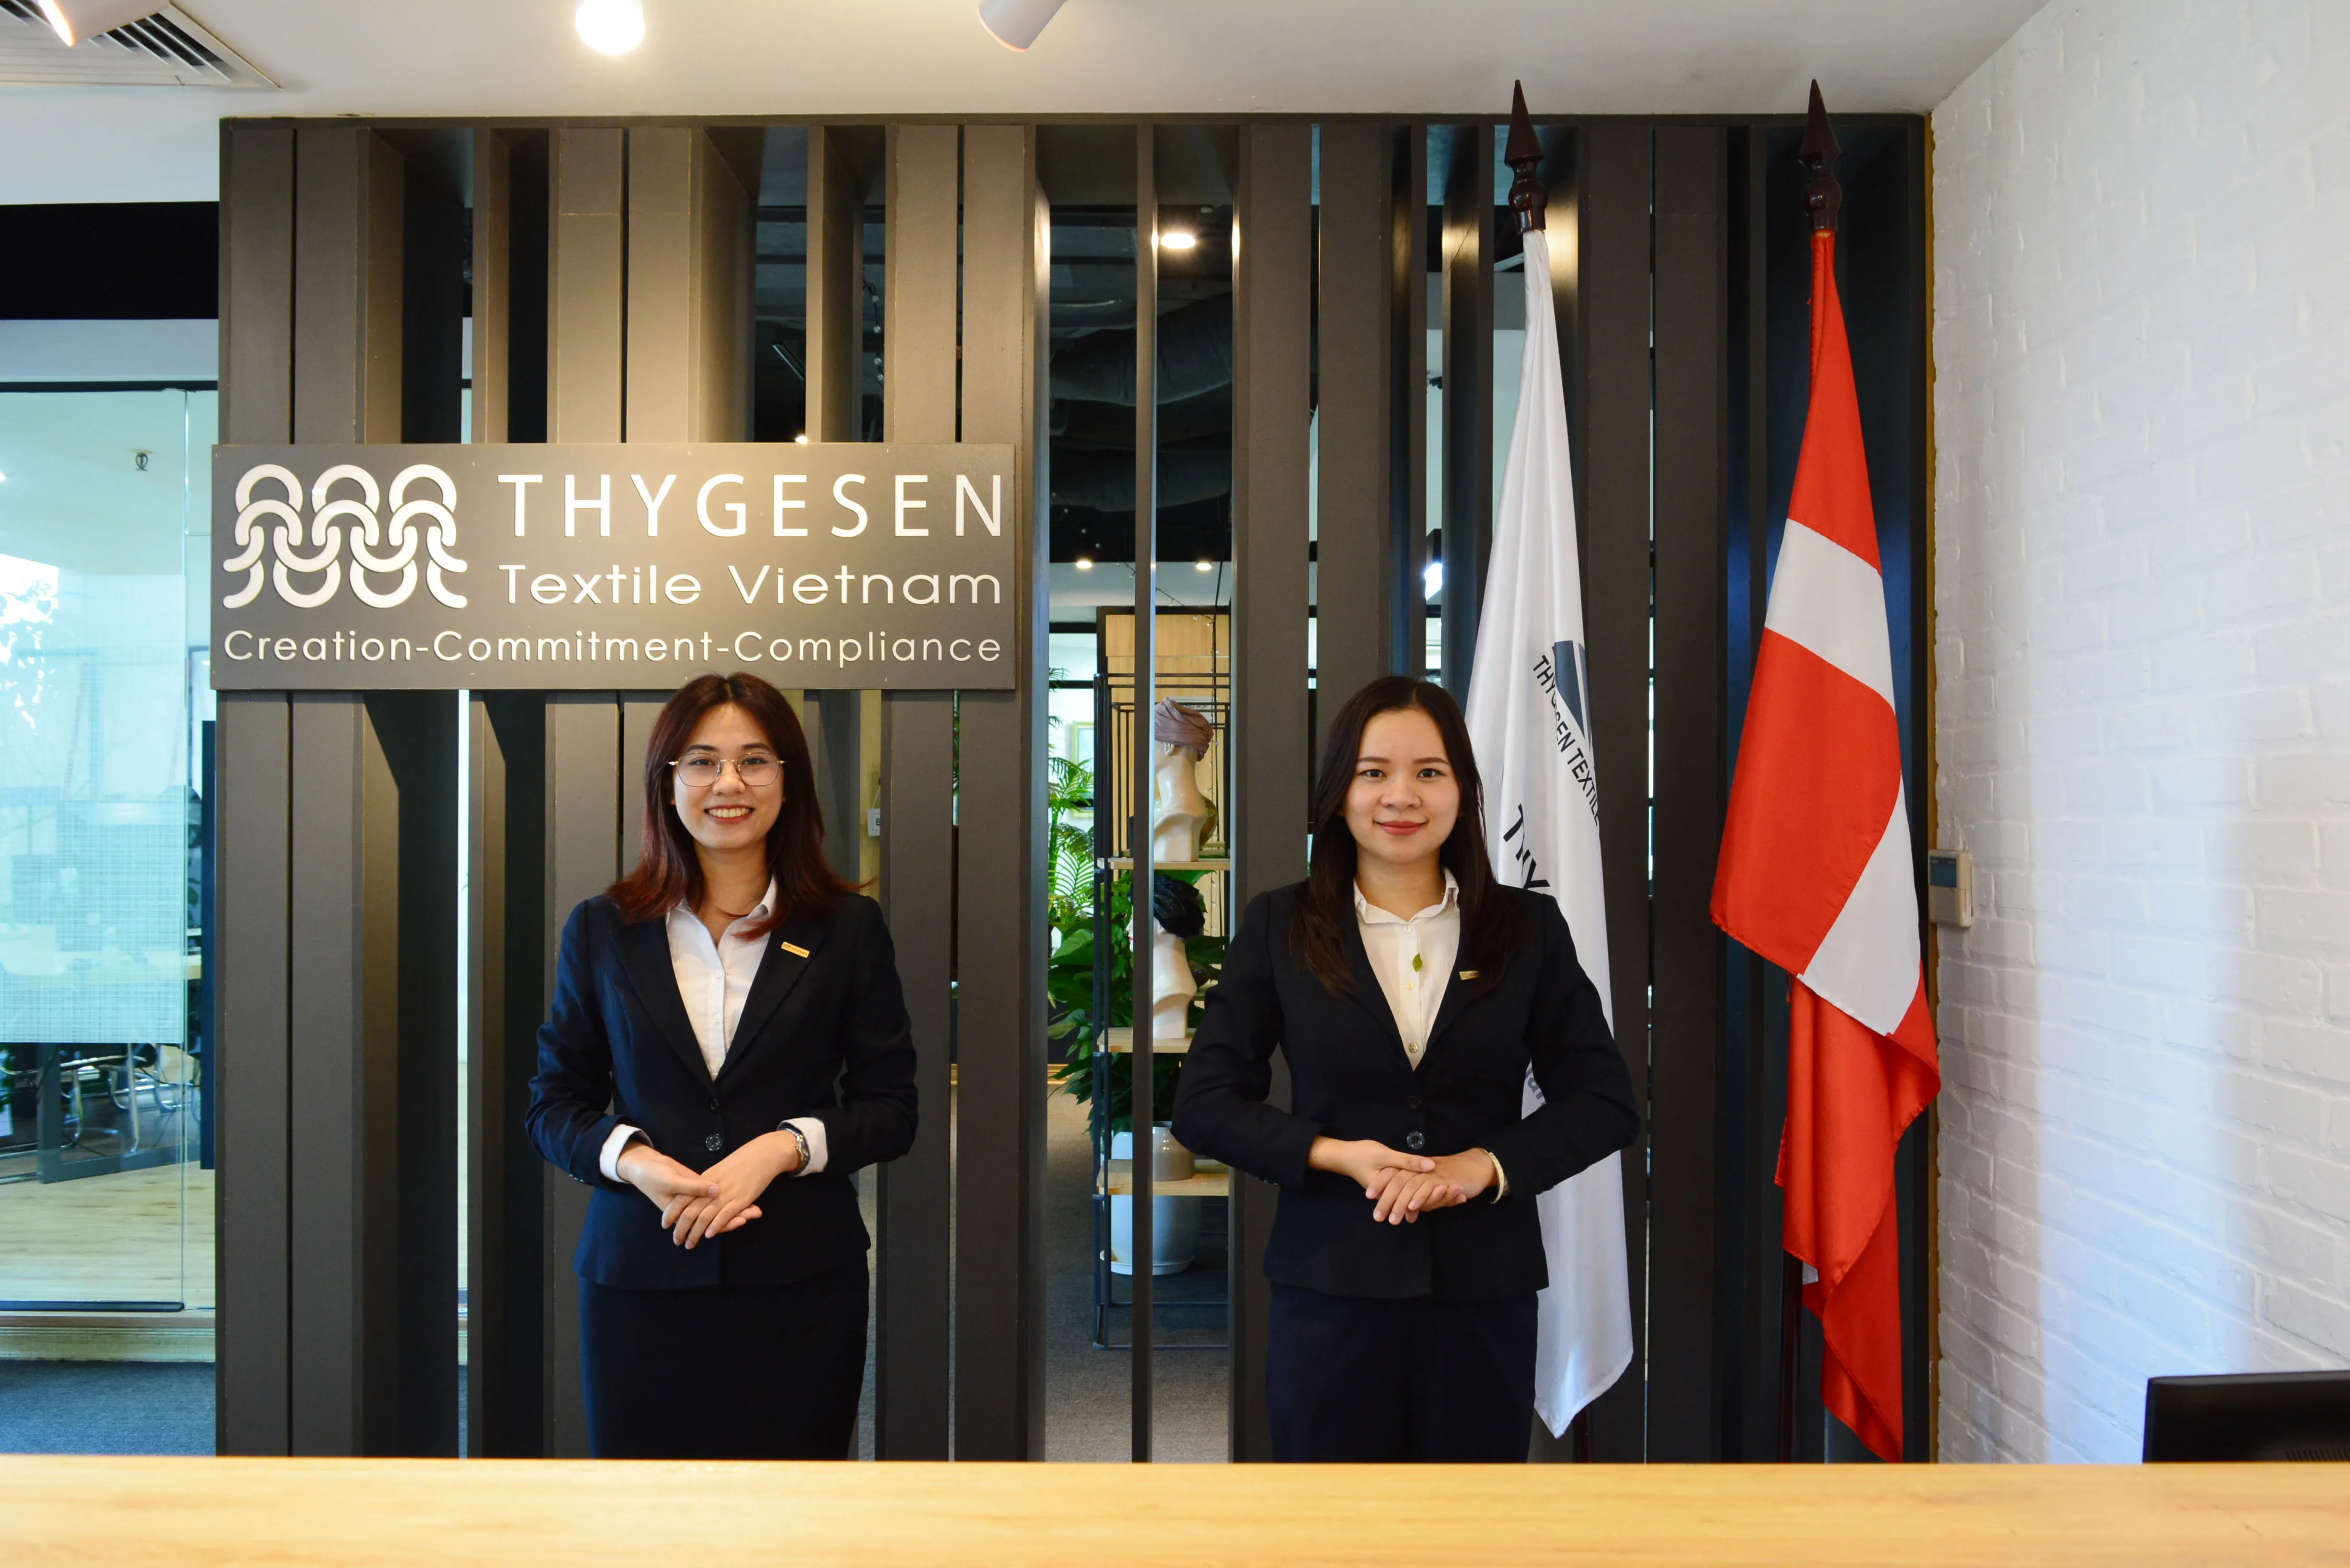 Thygesen Vietnam is your partner in sustainable fashion manufacturing